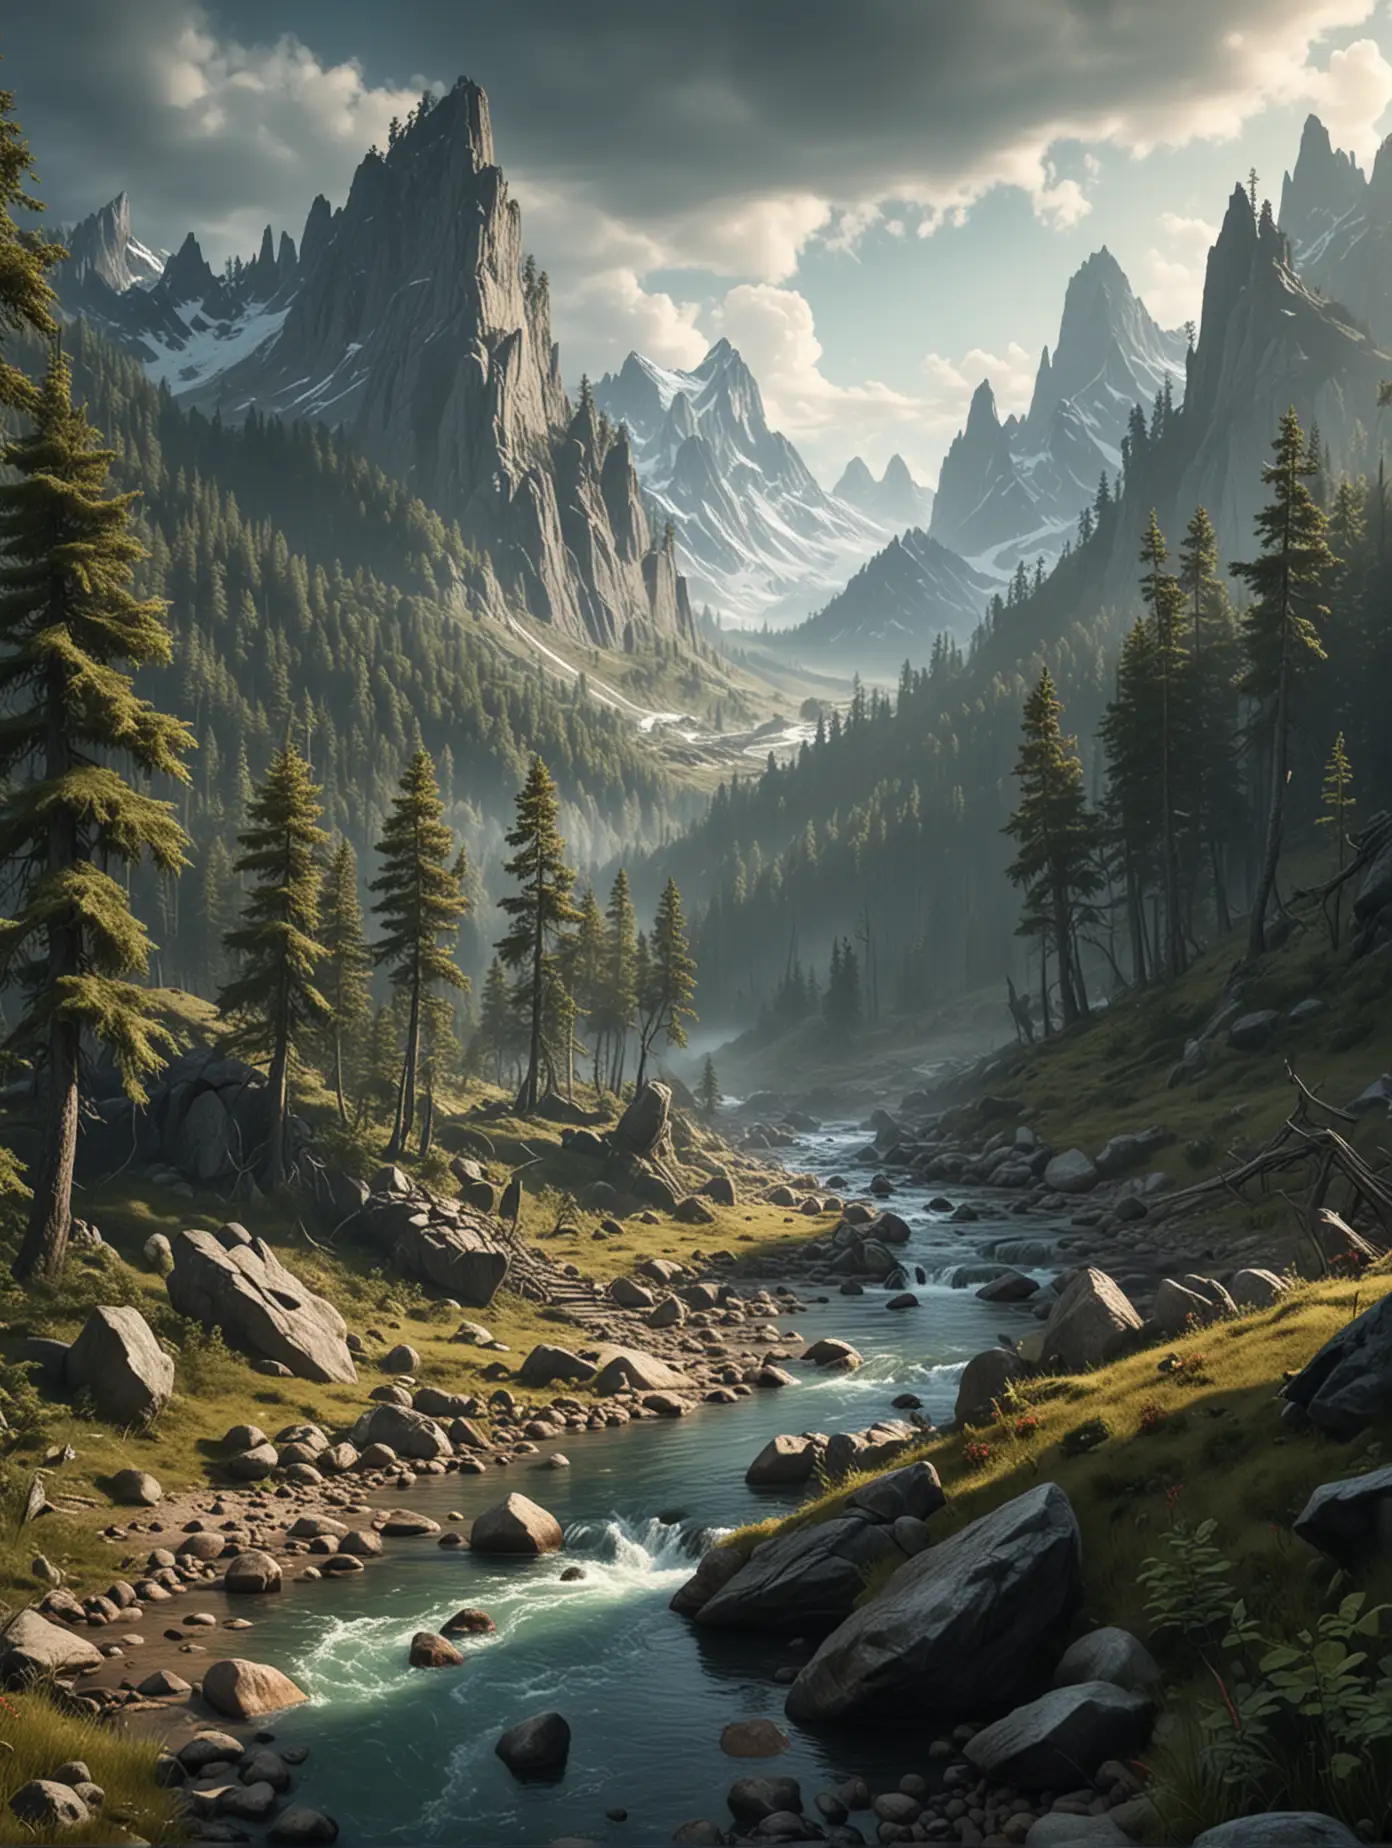 Enigmatic Mountains and Primeval Forests Illustration in Stunning 8K HighDefinition